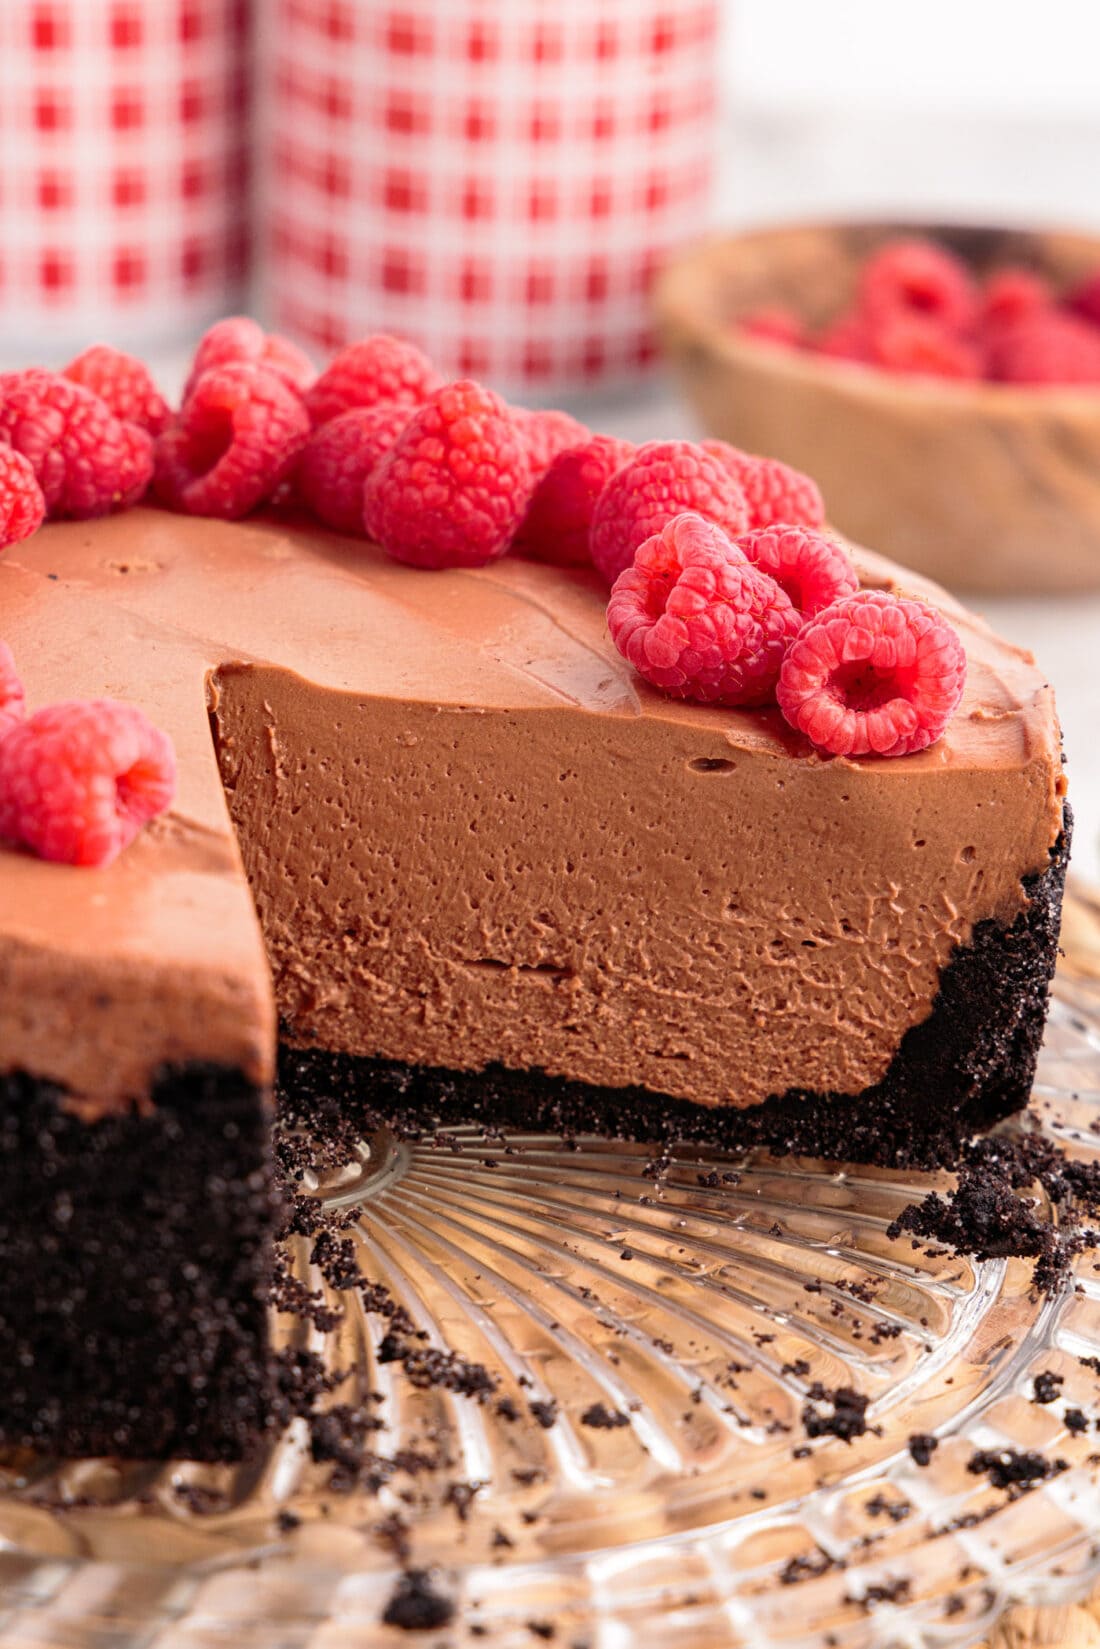 No Bake Chocolate Cheesecake with two slices removed